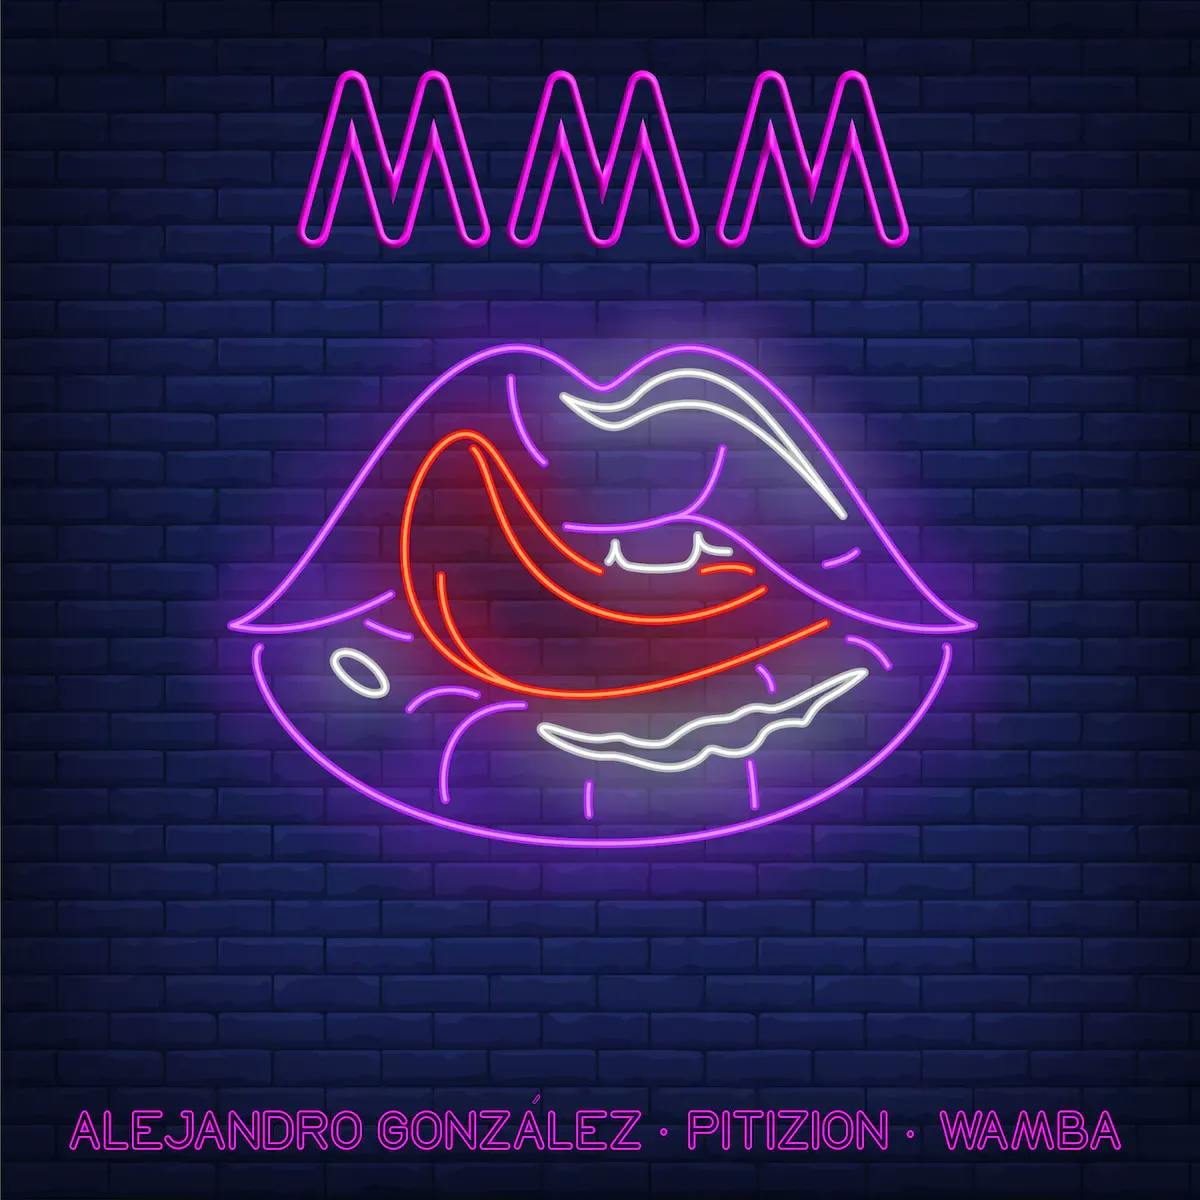 Neon light of lips with the tongue out and text that says, "MMM"